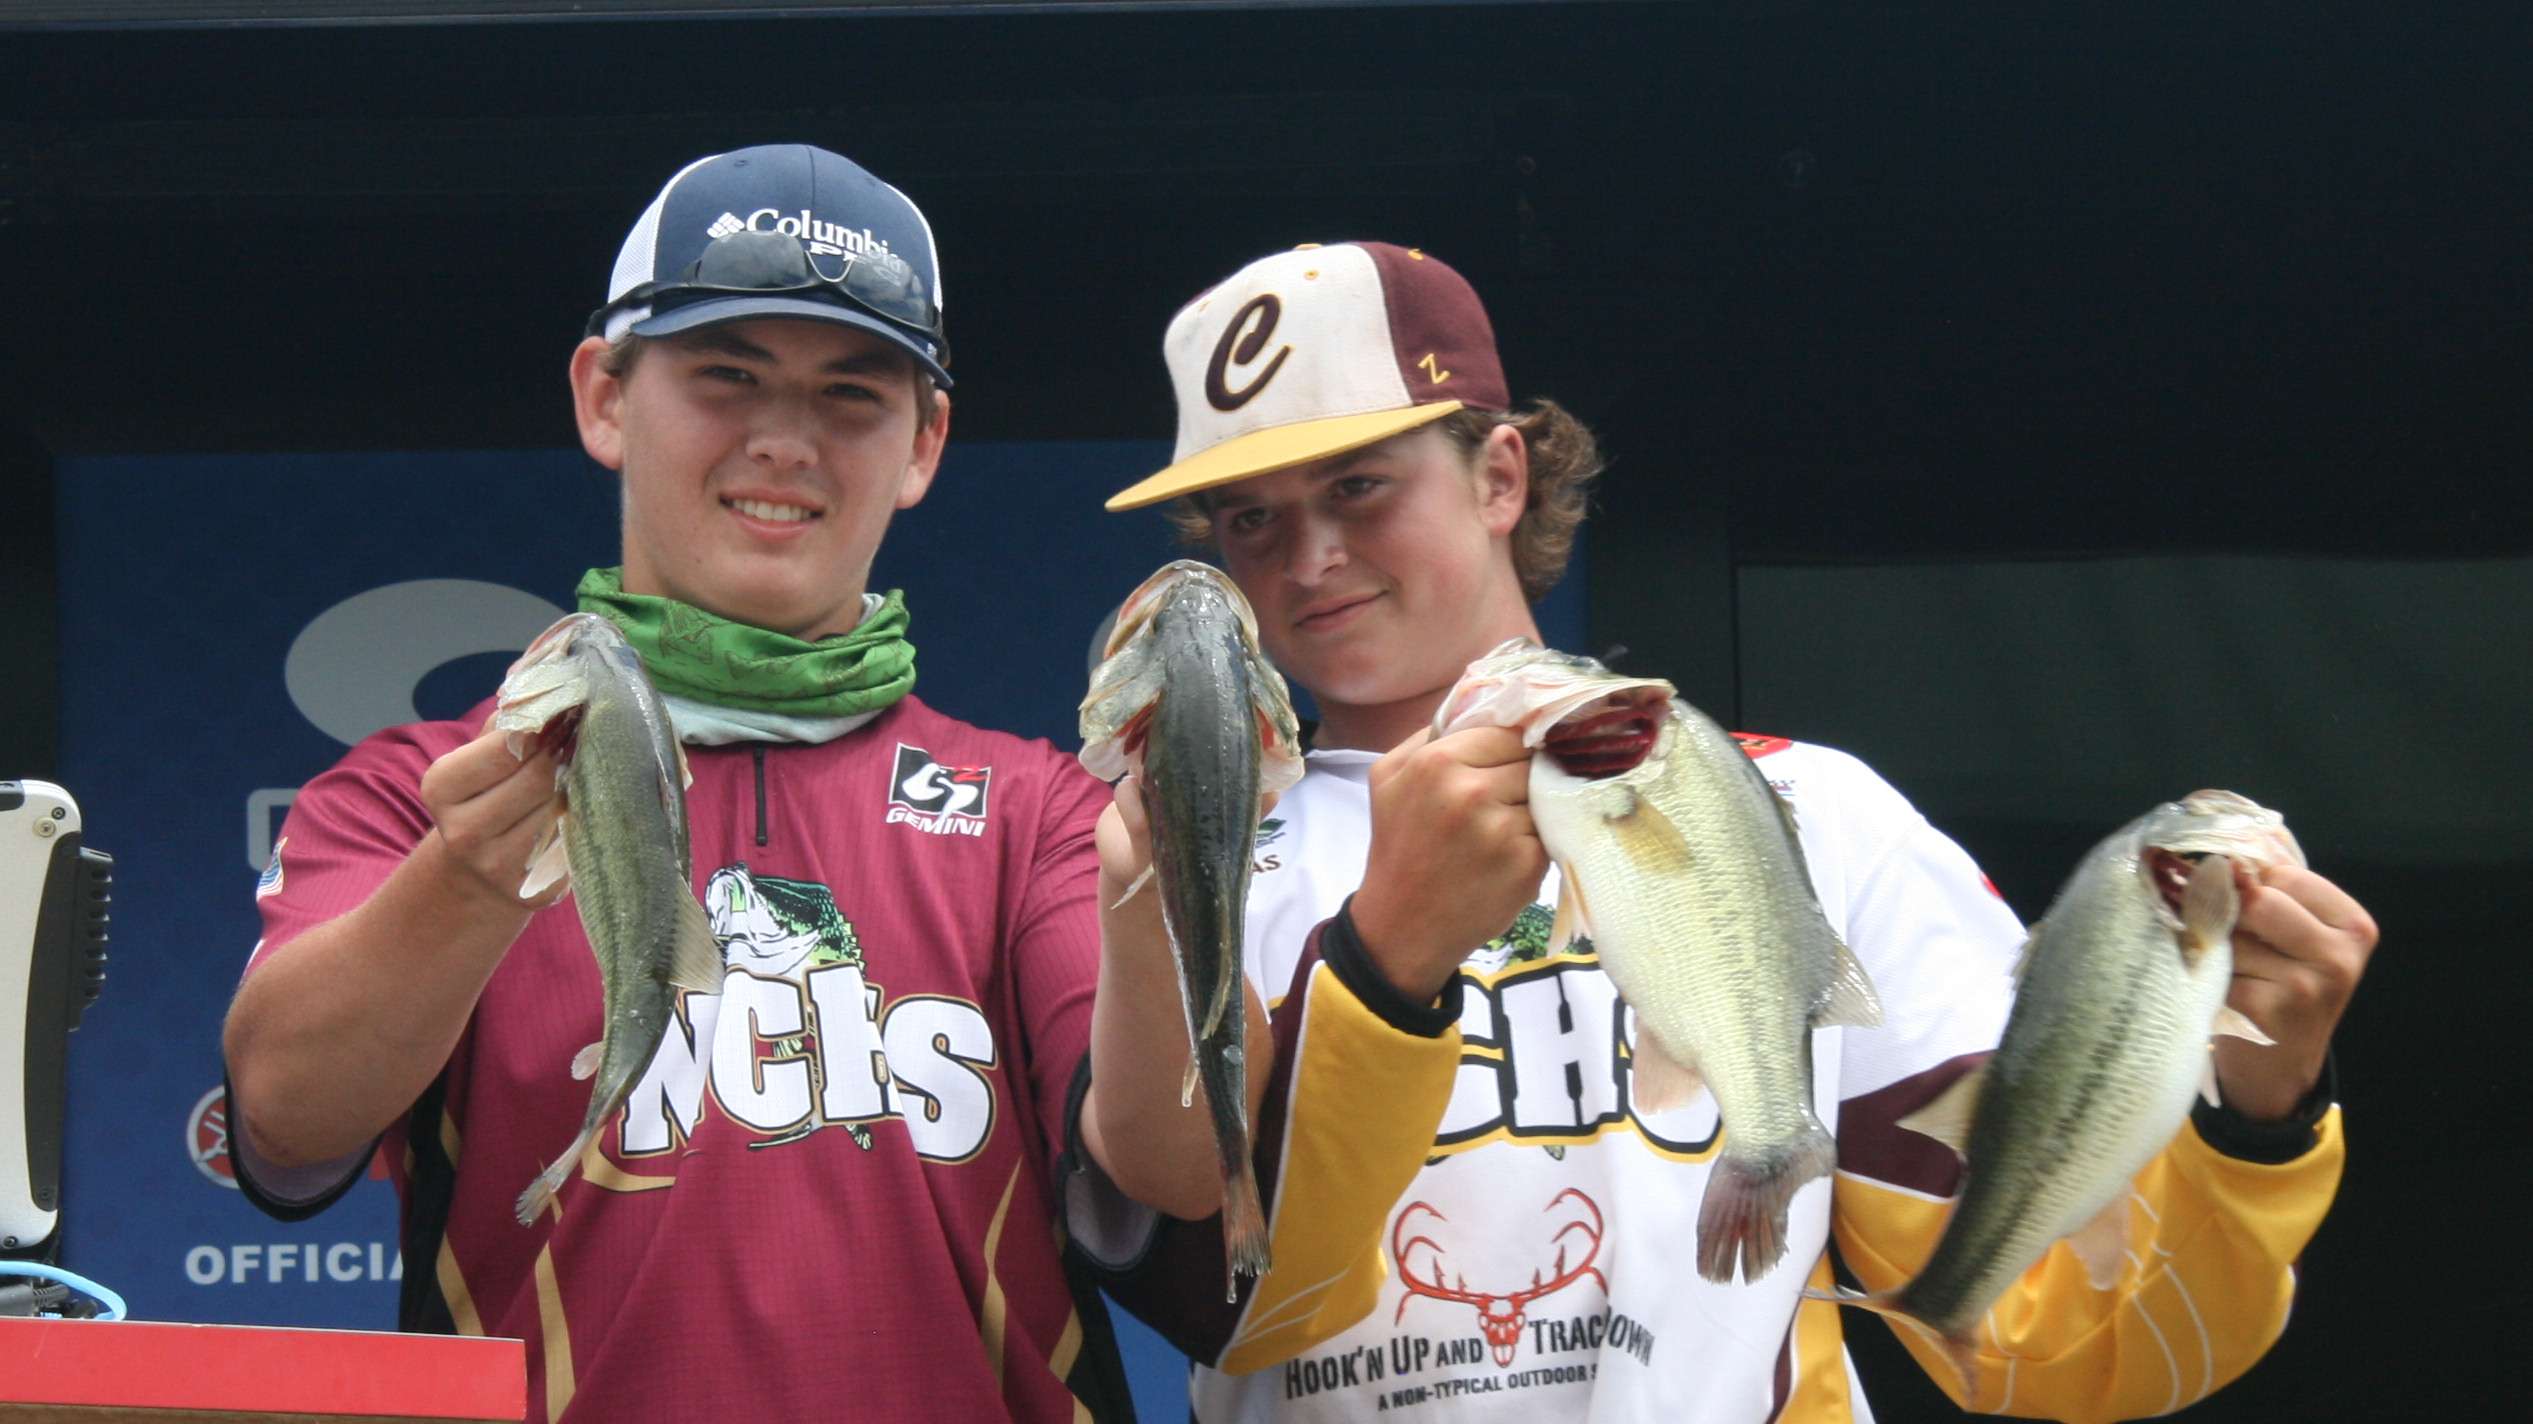 Thomas Wiggins and Cody Harmous of Natchitoches (La.) Central High placed 20th with 7-11.